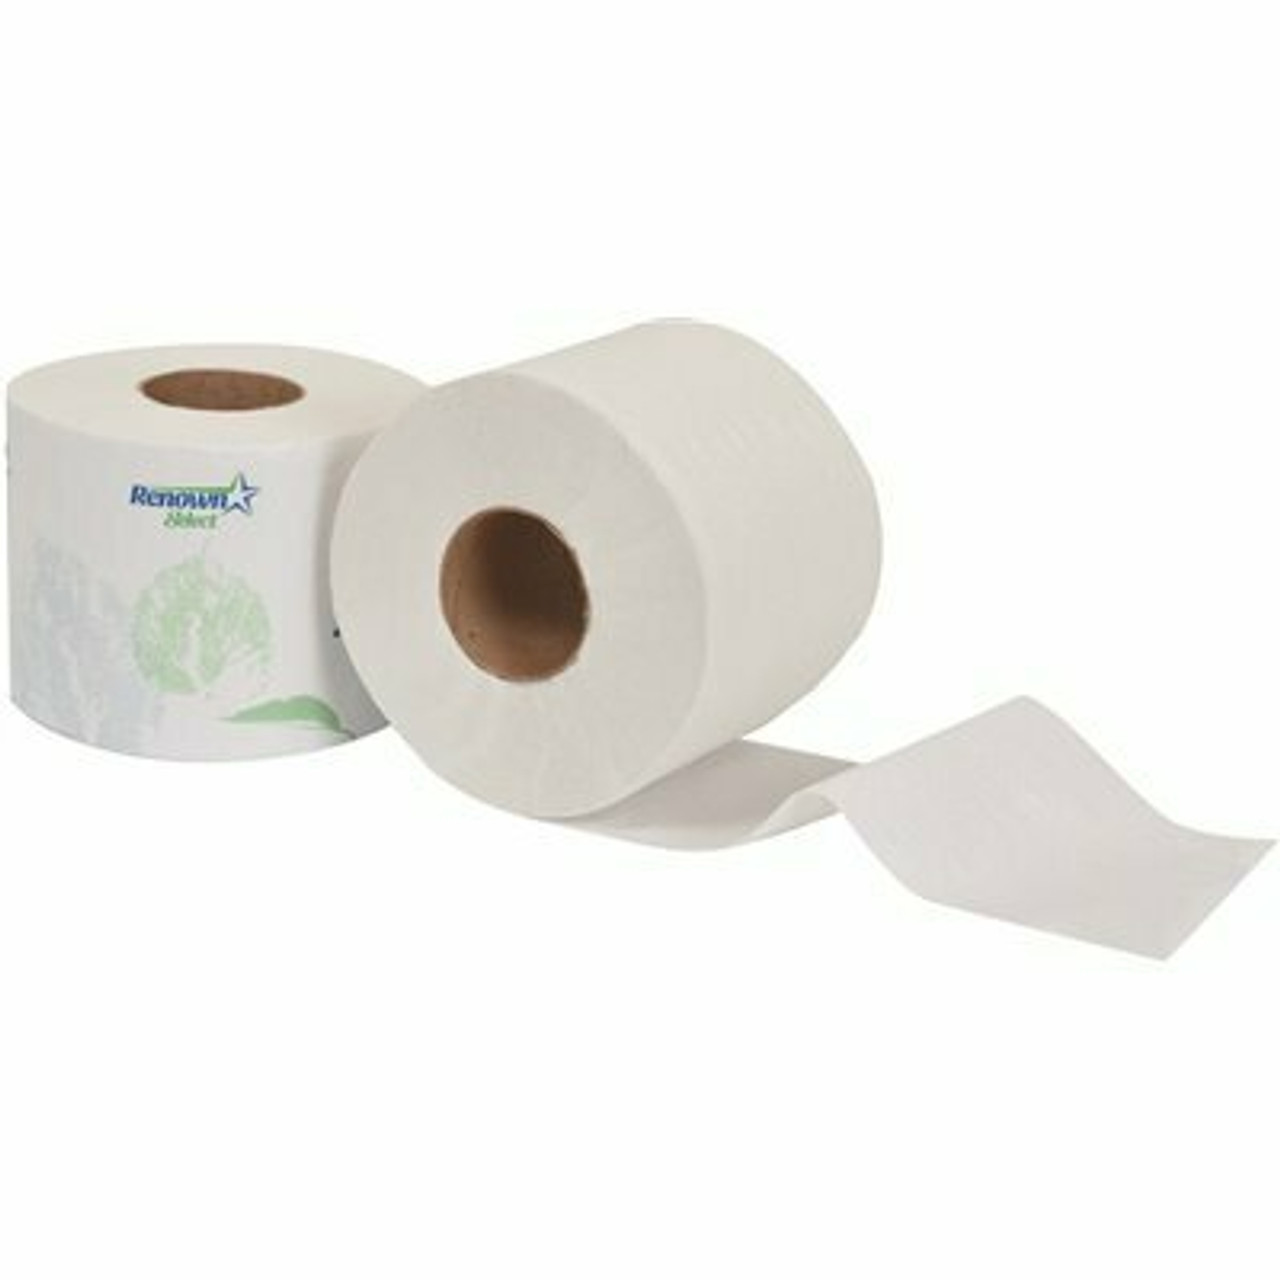 Renown Single Roll Banded 2-Ply 3.75 In. X 4 In. Toilet Paper (616 Sheets Per Roll 48 Rolls Per Case)